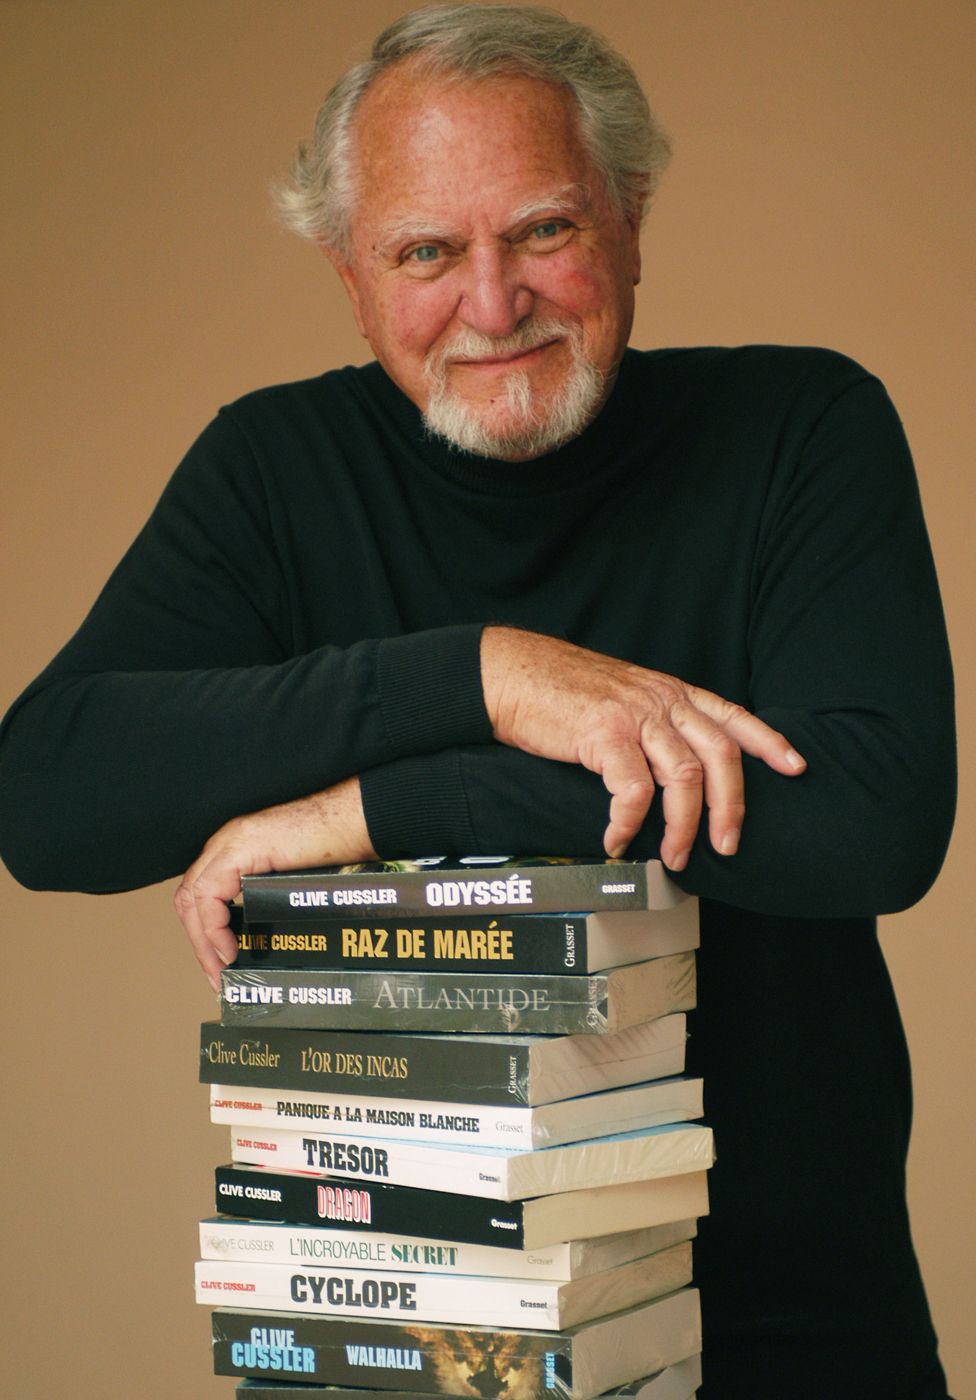 Clive Cussler with stack of books